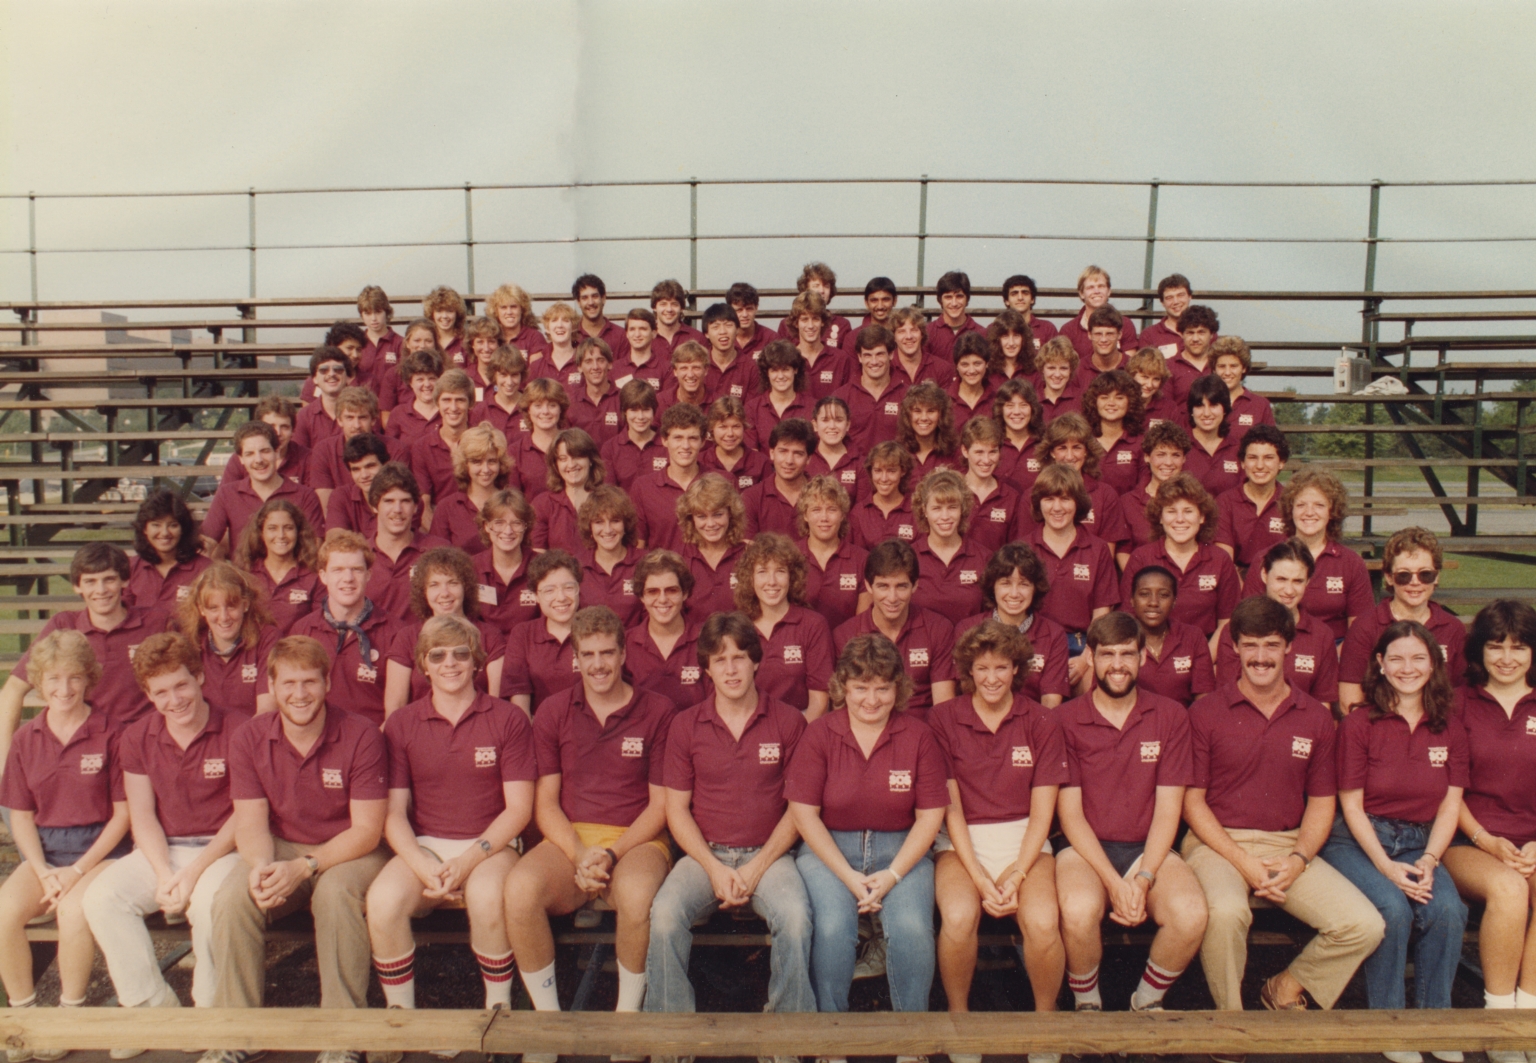 1983 Student Orientation Services Leaders